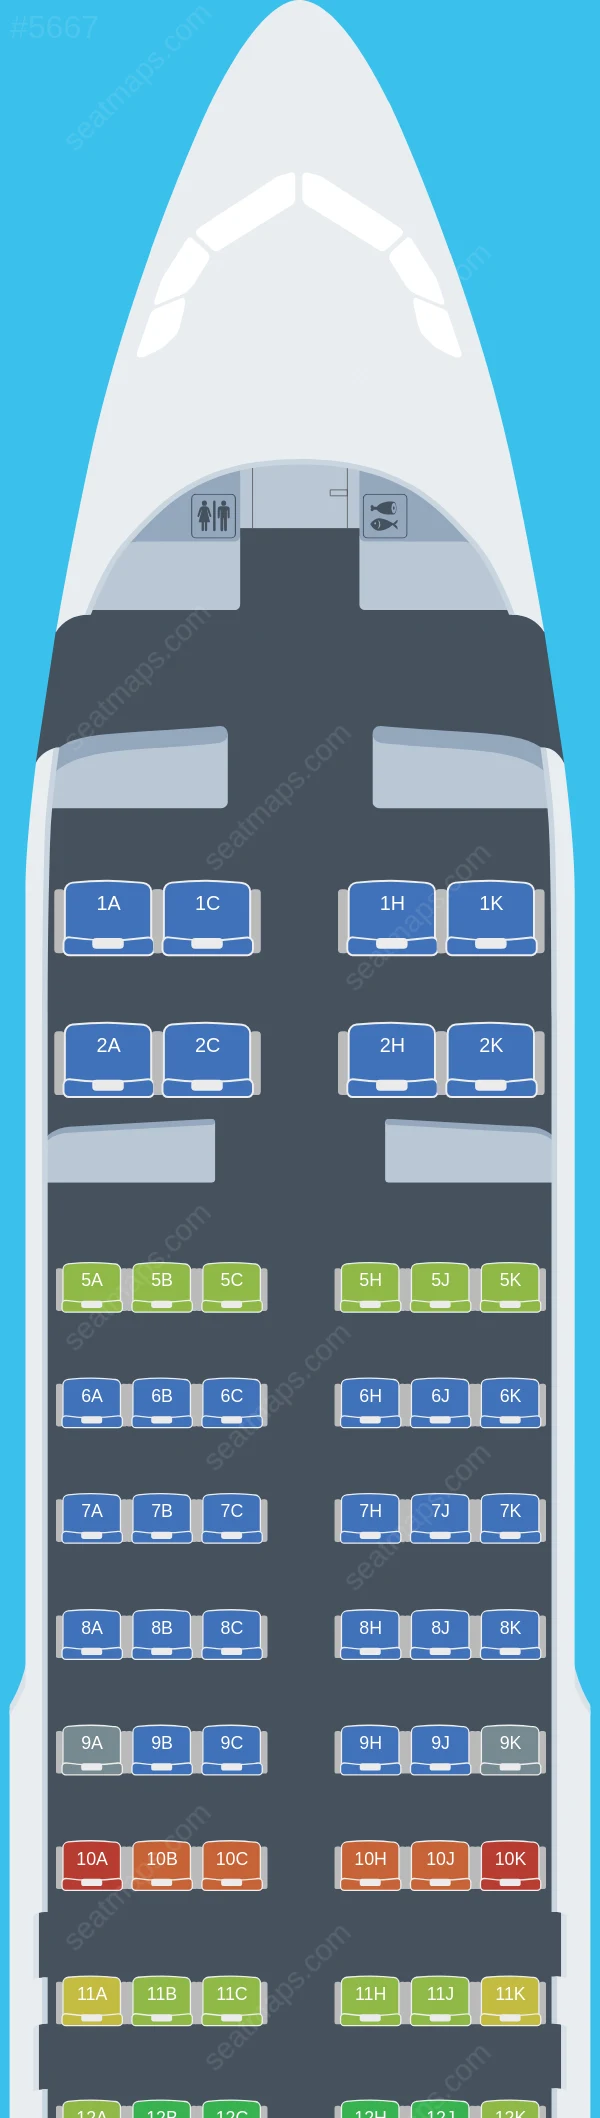 ANA - All Nippon Airways Airbus A320neo seatmap preview